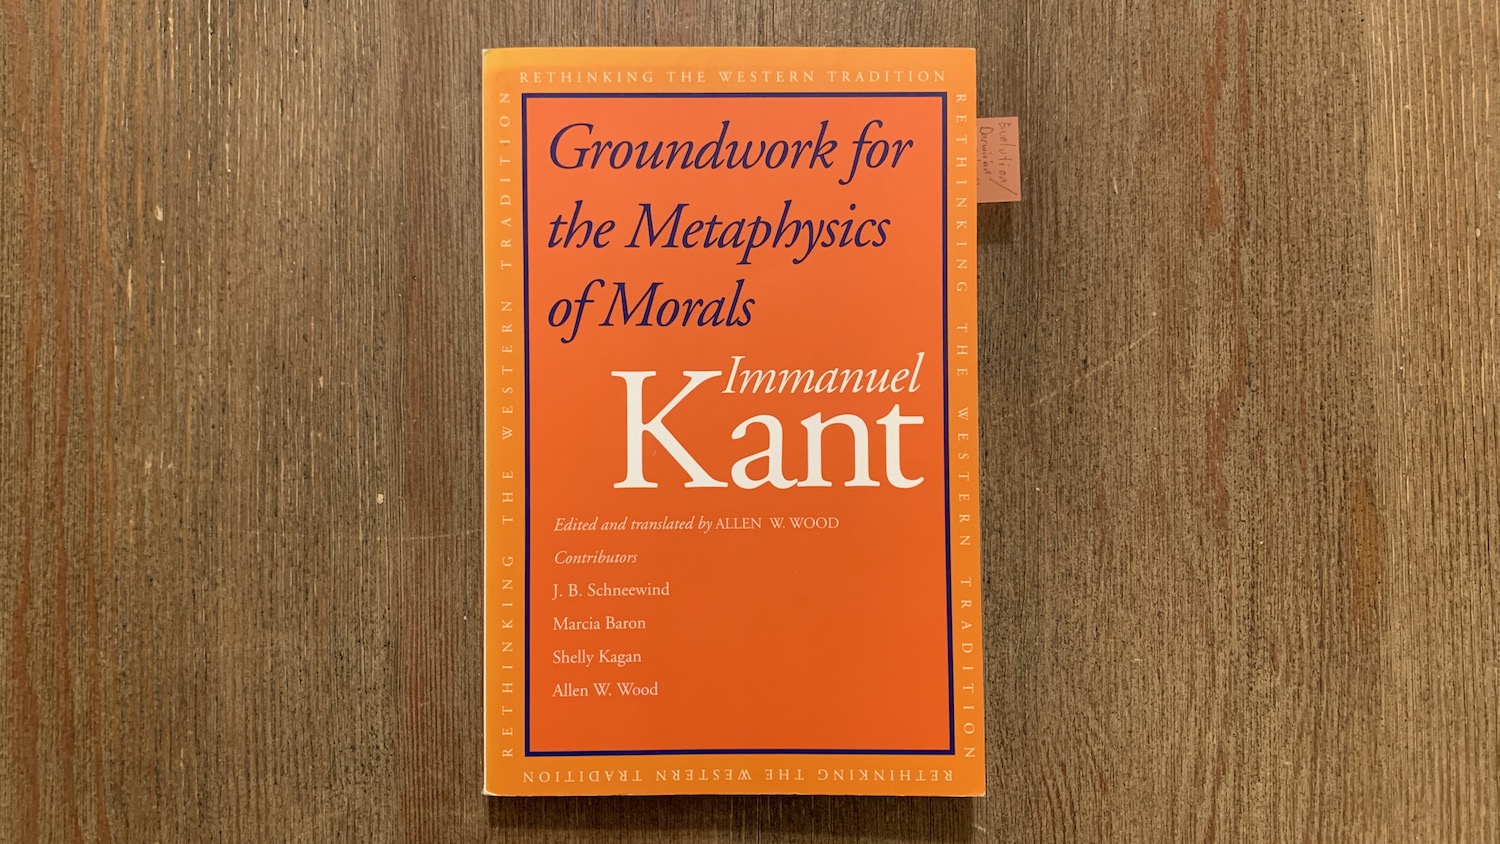 Picture of the book Groundwork for the Metaphysics of Morals by Immanuel Kant